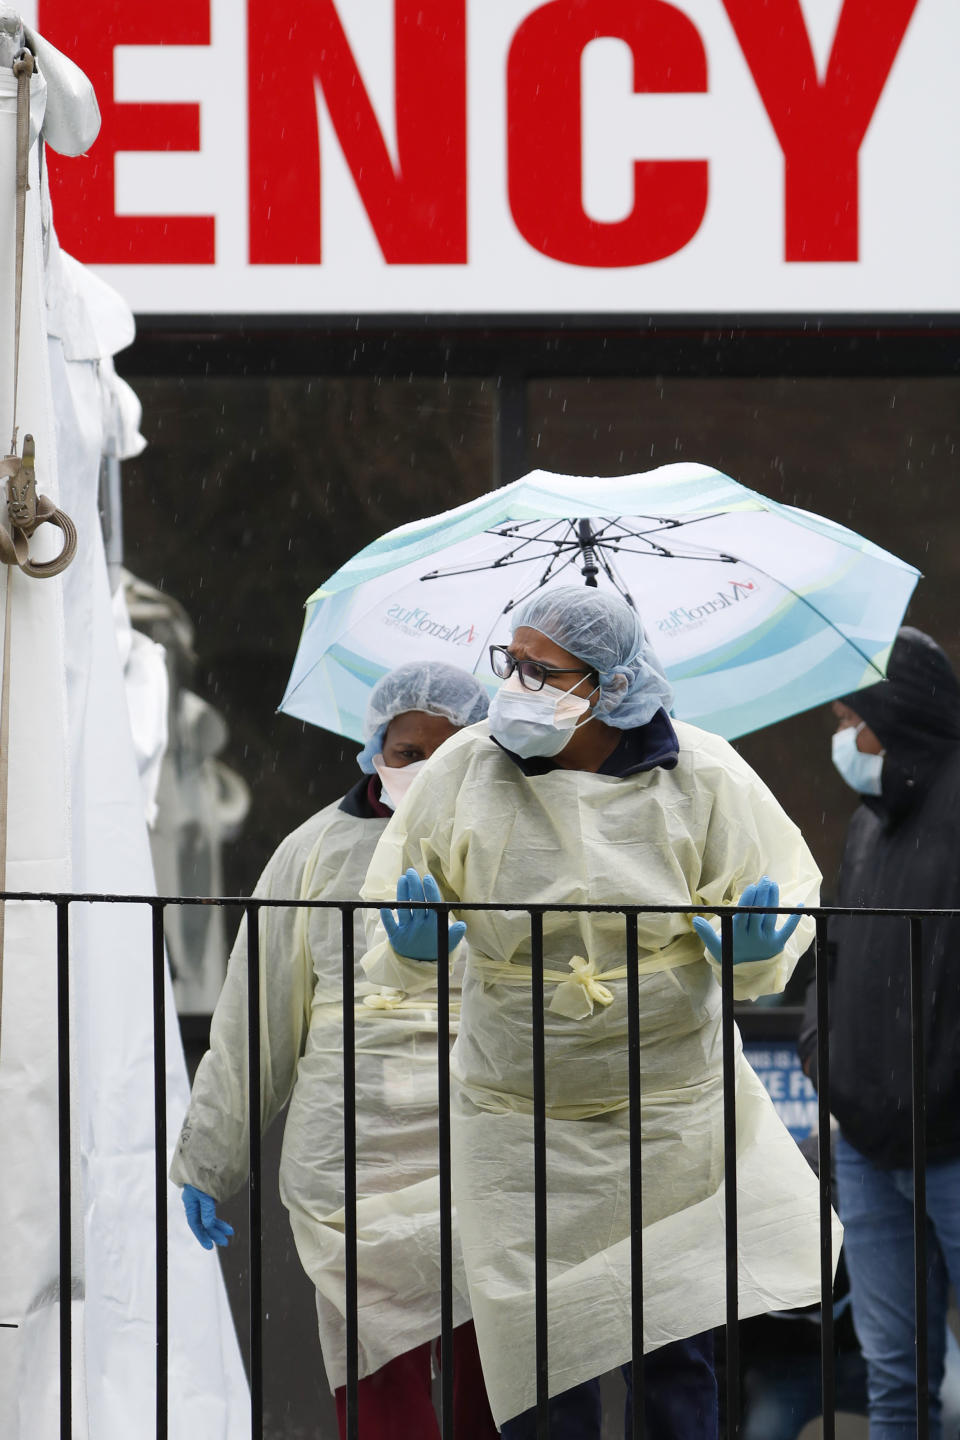 A medical worker checks to see if anyone is waiting in line outside a COVID-19 testing tent at Elmhurst Hospital Center in New York, Saturday, March 28, 2020. The hospital is caring for a high number of coronavirus patients in the city. (AP Photo/Kathy Willens)